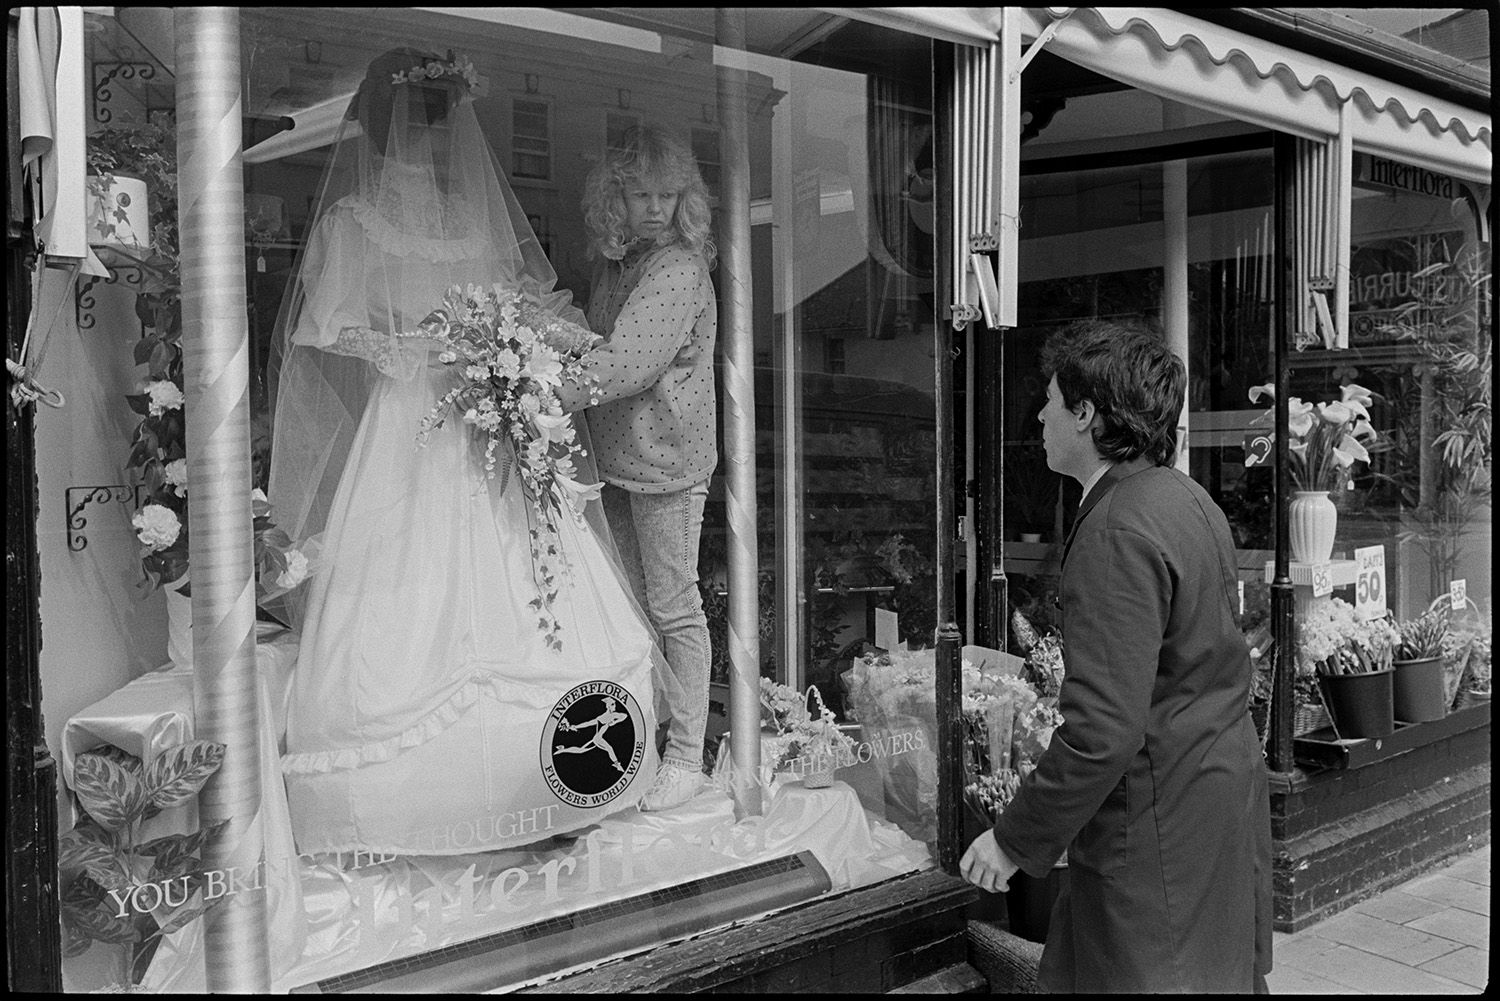 Man and woman arranging Easter wedding display in florists shop window.
[A woman arranging a wedding dress in a florist shop window for an Easter display in South Molton. A man is outside checking the display.]